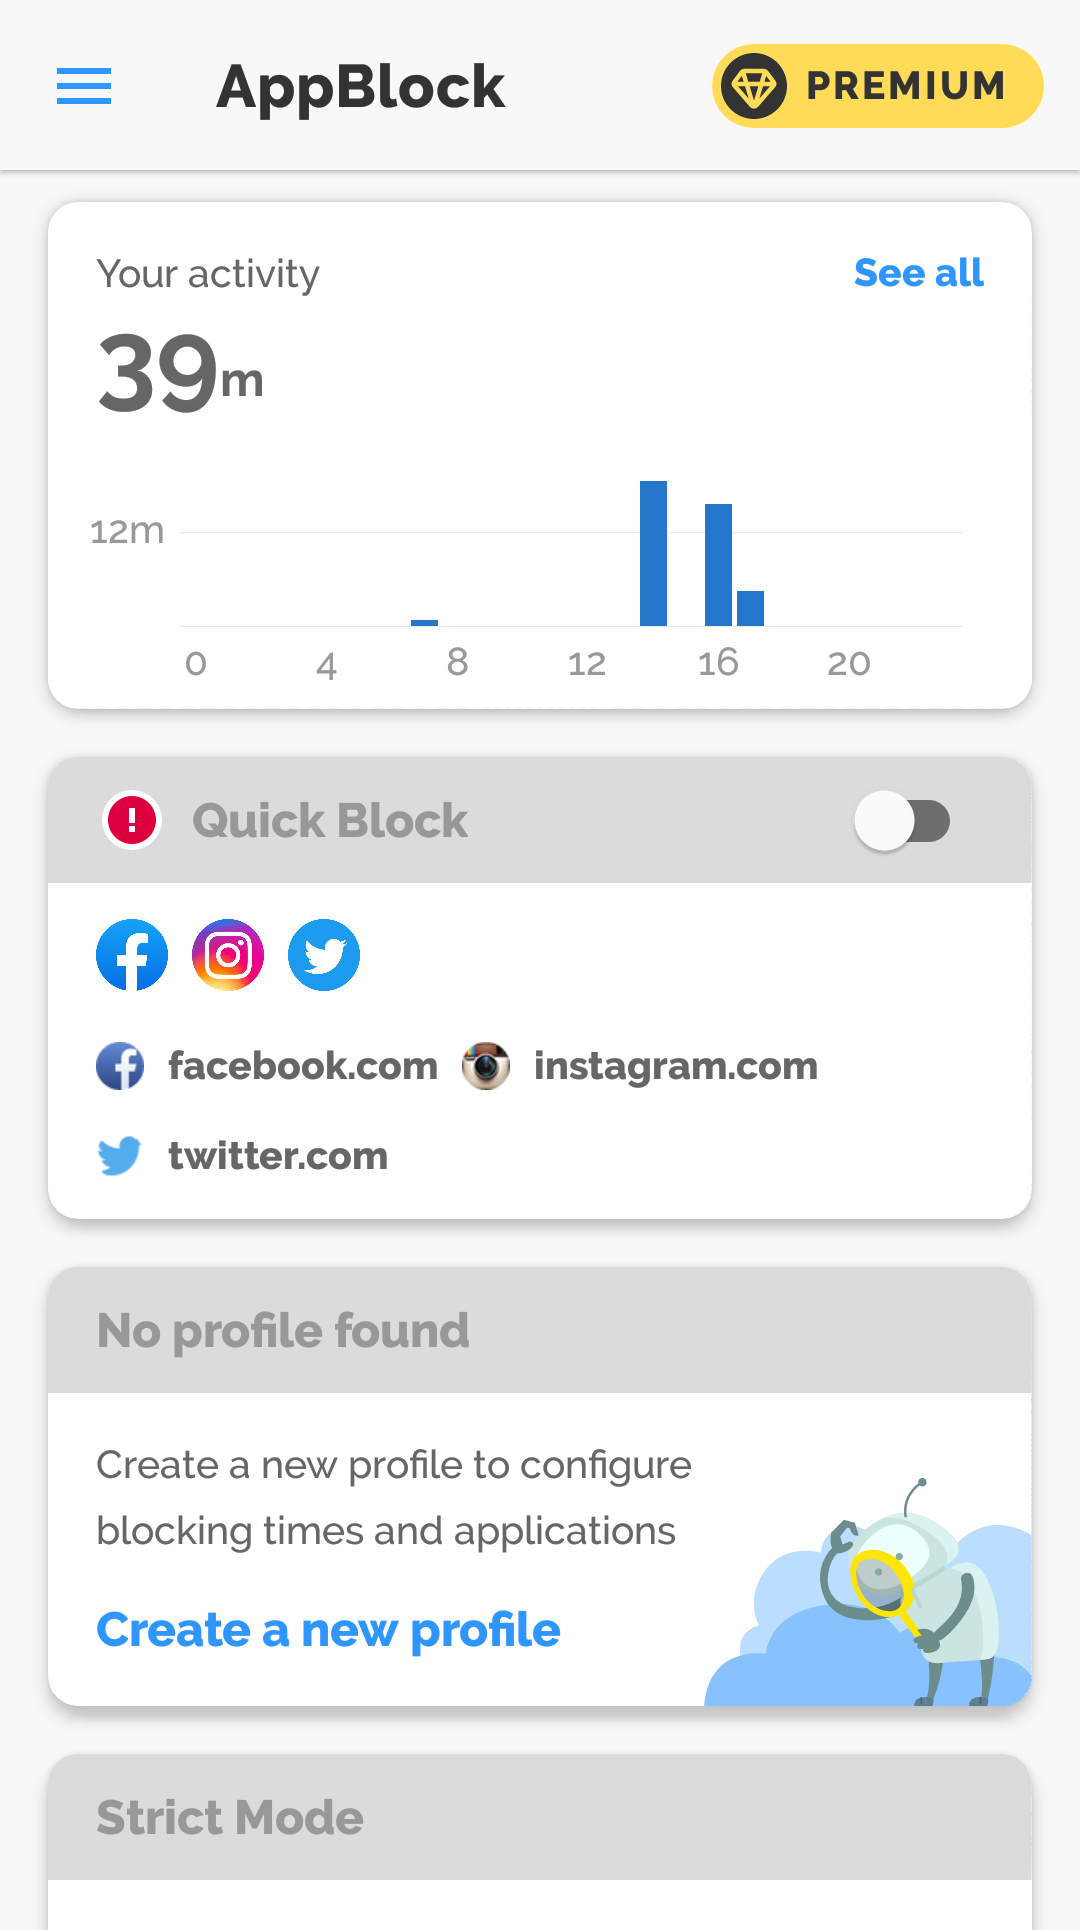 AppBlock Dashboard With Activity and Blocked Apps